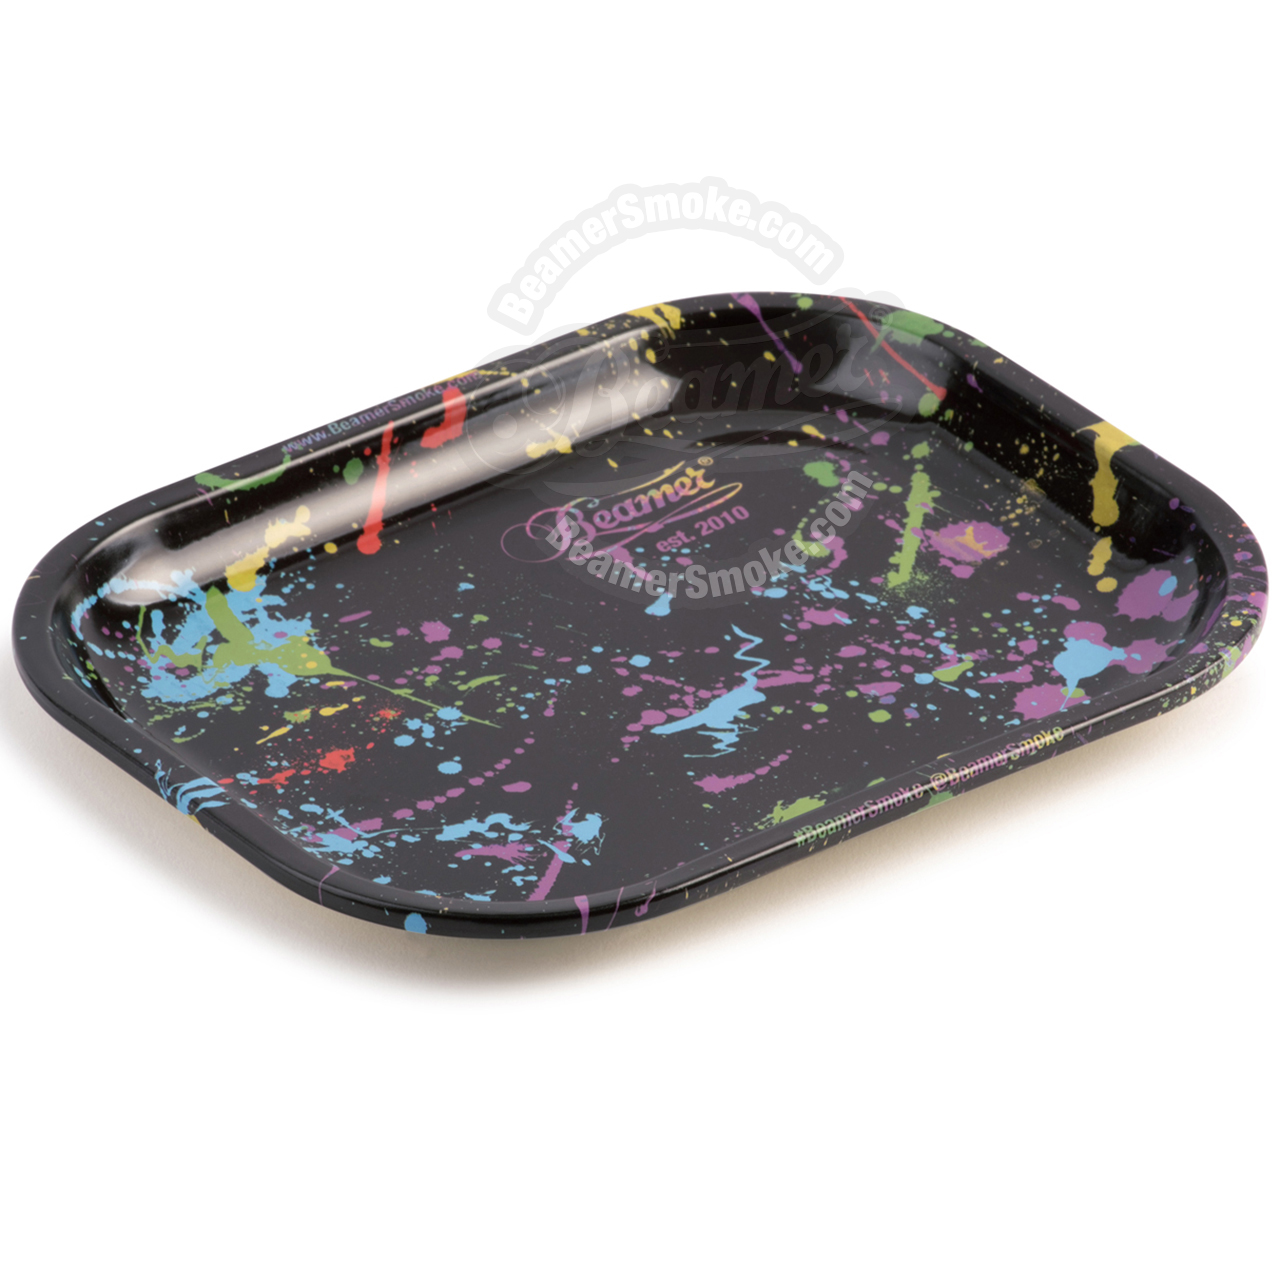 Beamer Small Metal Rolling Tray, Painter Design - 7 x 5.5